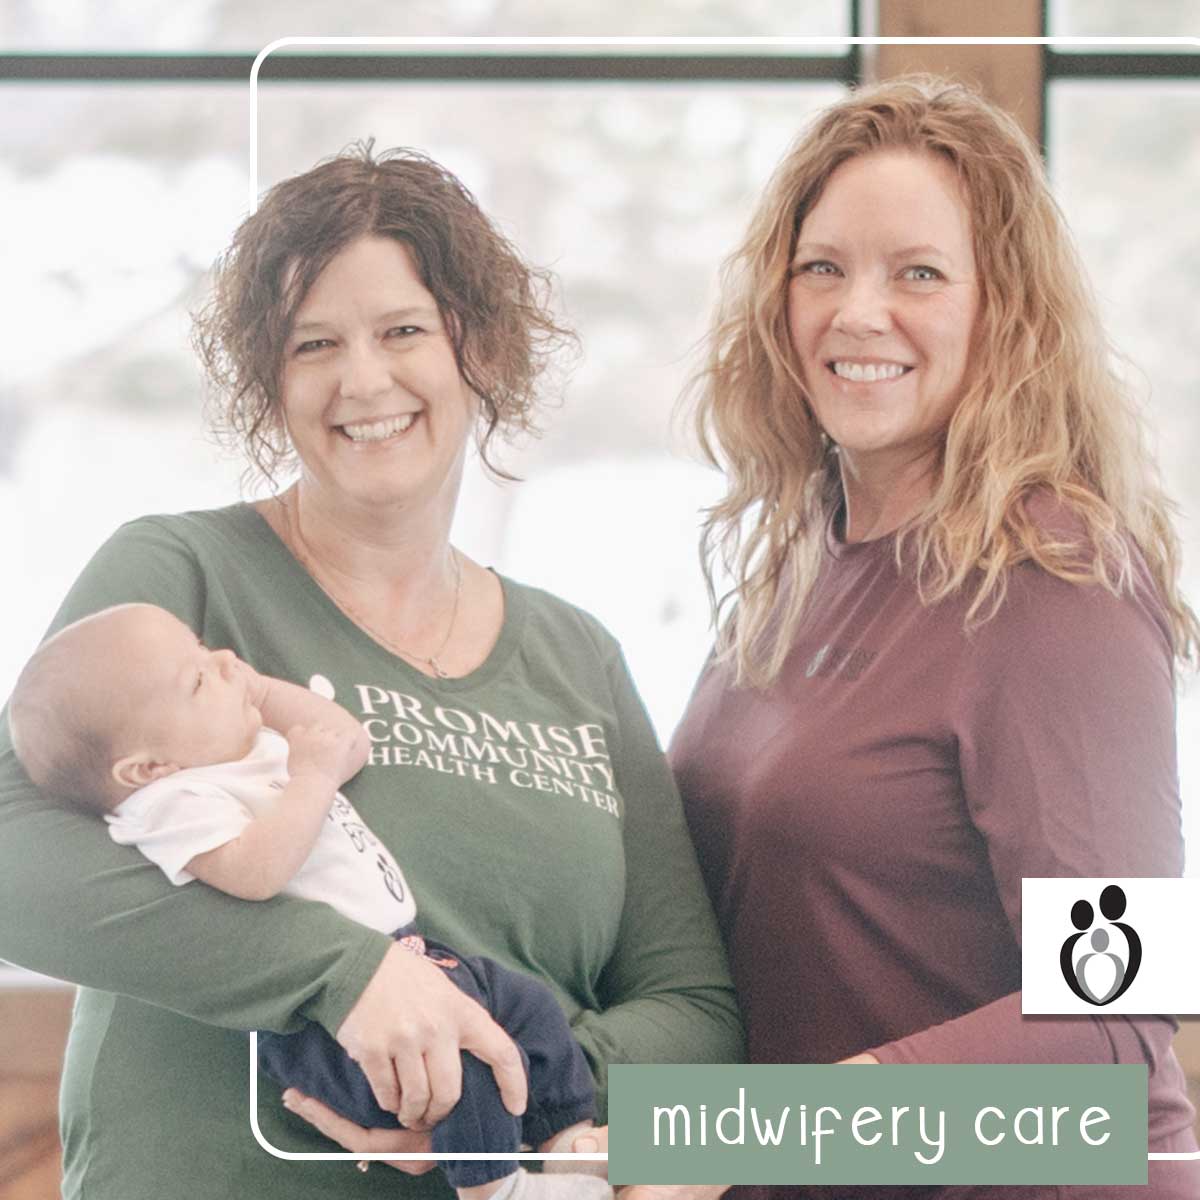 Kris Tinklenberg, RN, CLC, in Sioux Center, IA | Promise Community Health Center in Sioux Center, Iowa | Midwives in northwest Iowa, Midwives in southeast South Dakota, Midwives in southwest Minnesota | Midwives in Sioux Falls South Dakota, Midwives in Beresford South Dakota, Midwives in Sioux City IA, Midwives in LeMars IA, Midwives in Worthington MN, Midwives in Iowa, Midwives in South Dakota, Midwives in Minnesota